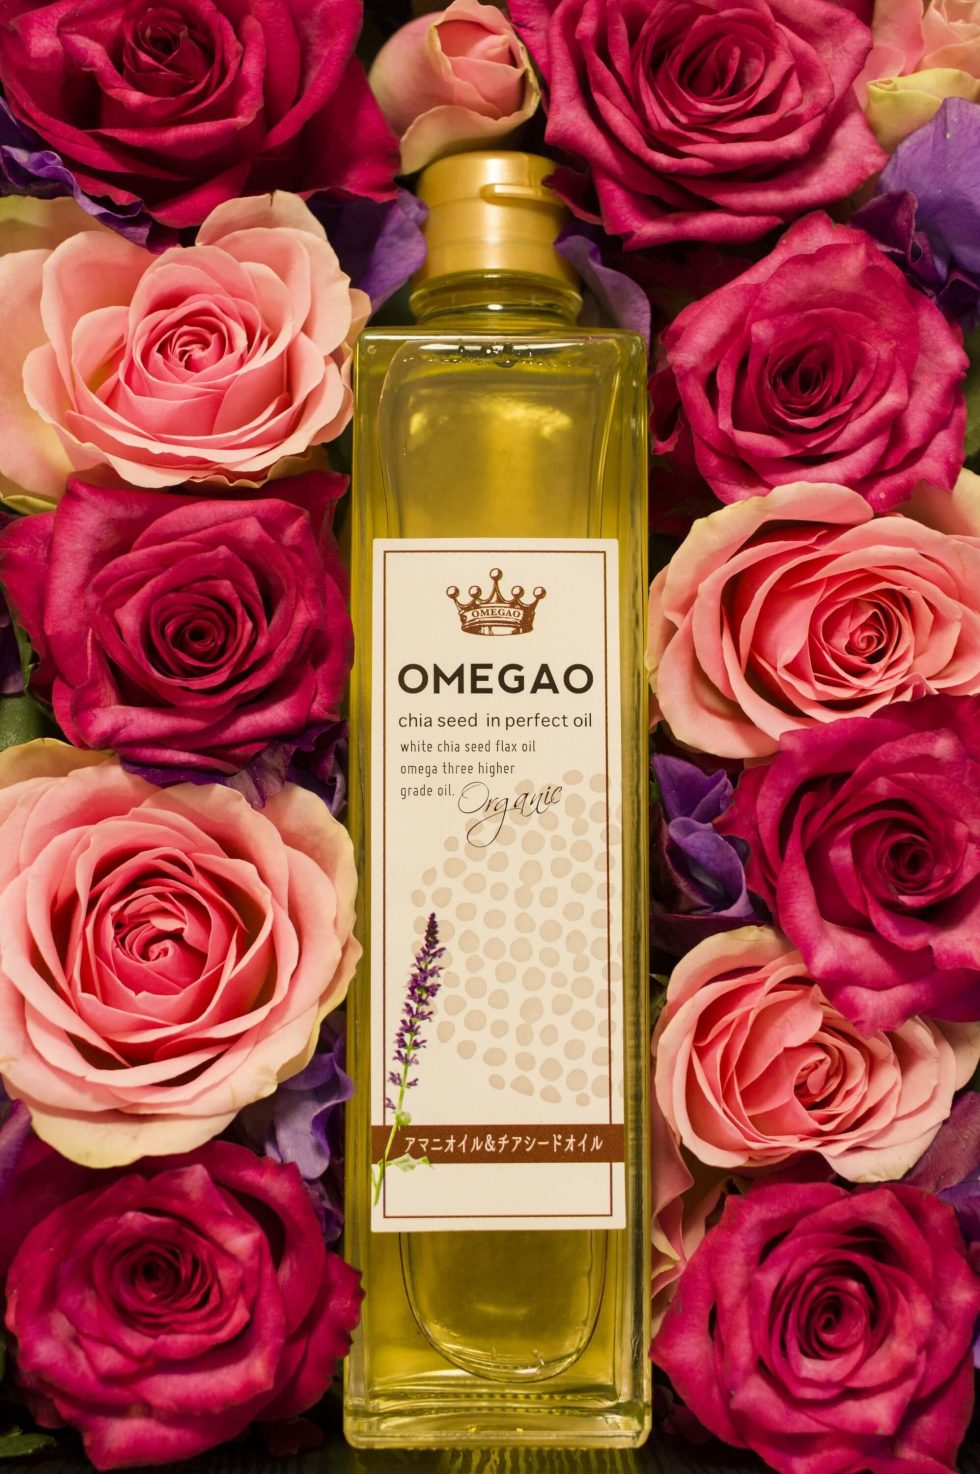 Omegao Chia and Flax Seed Oil